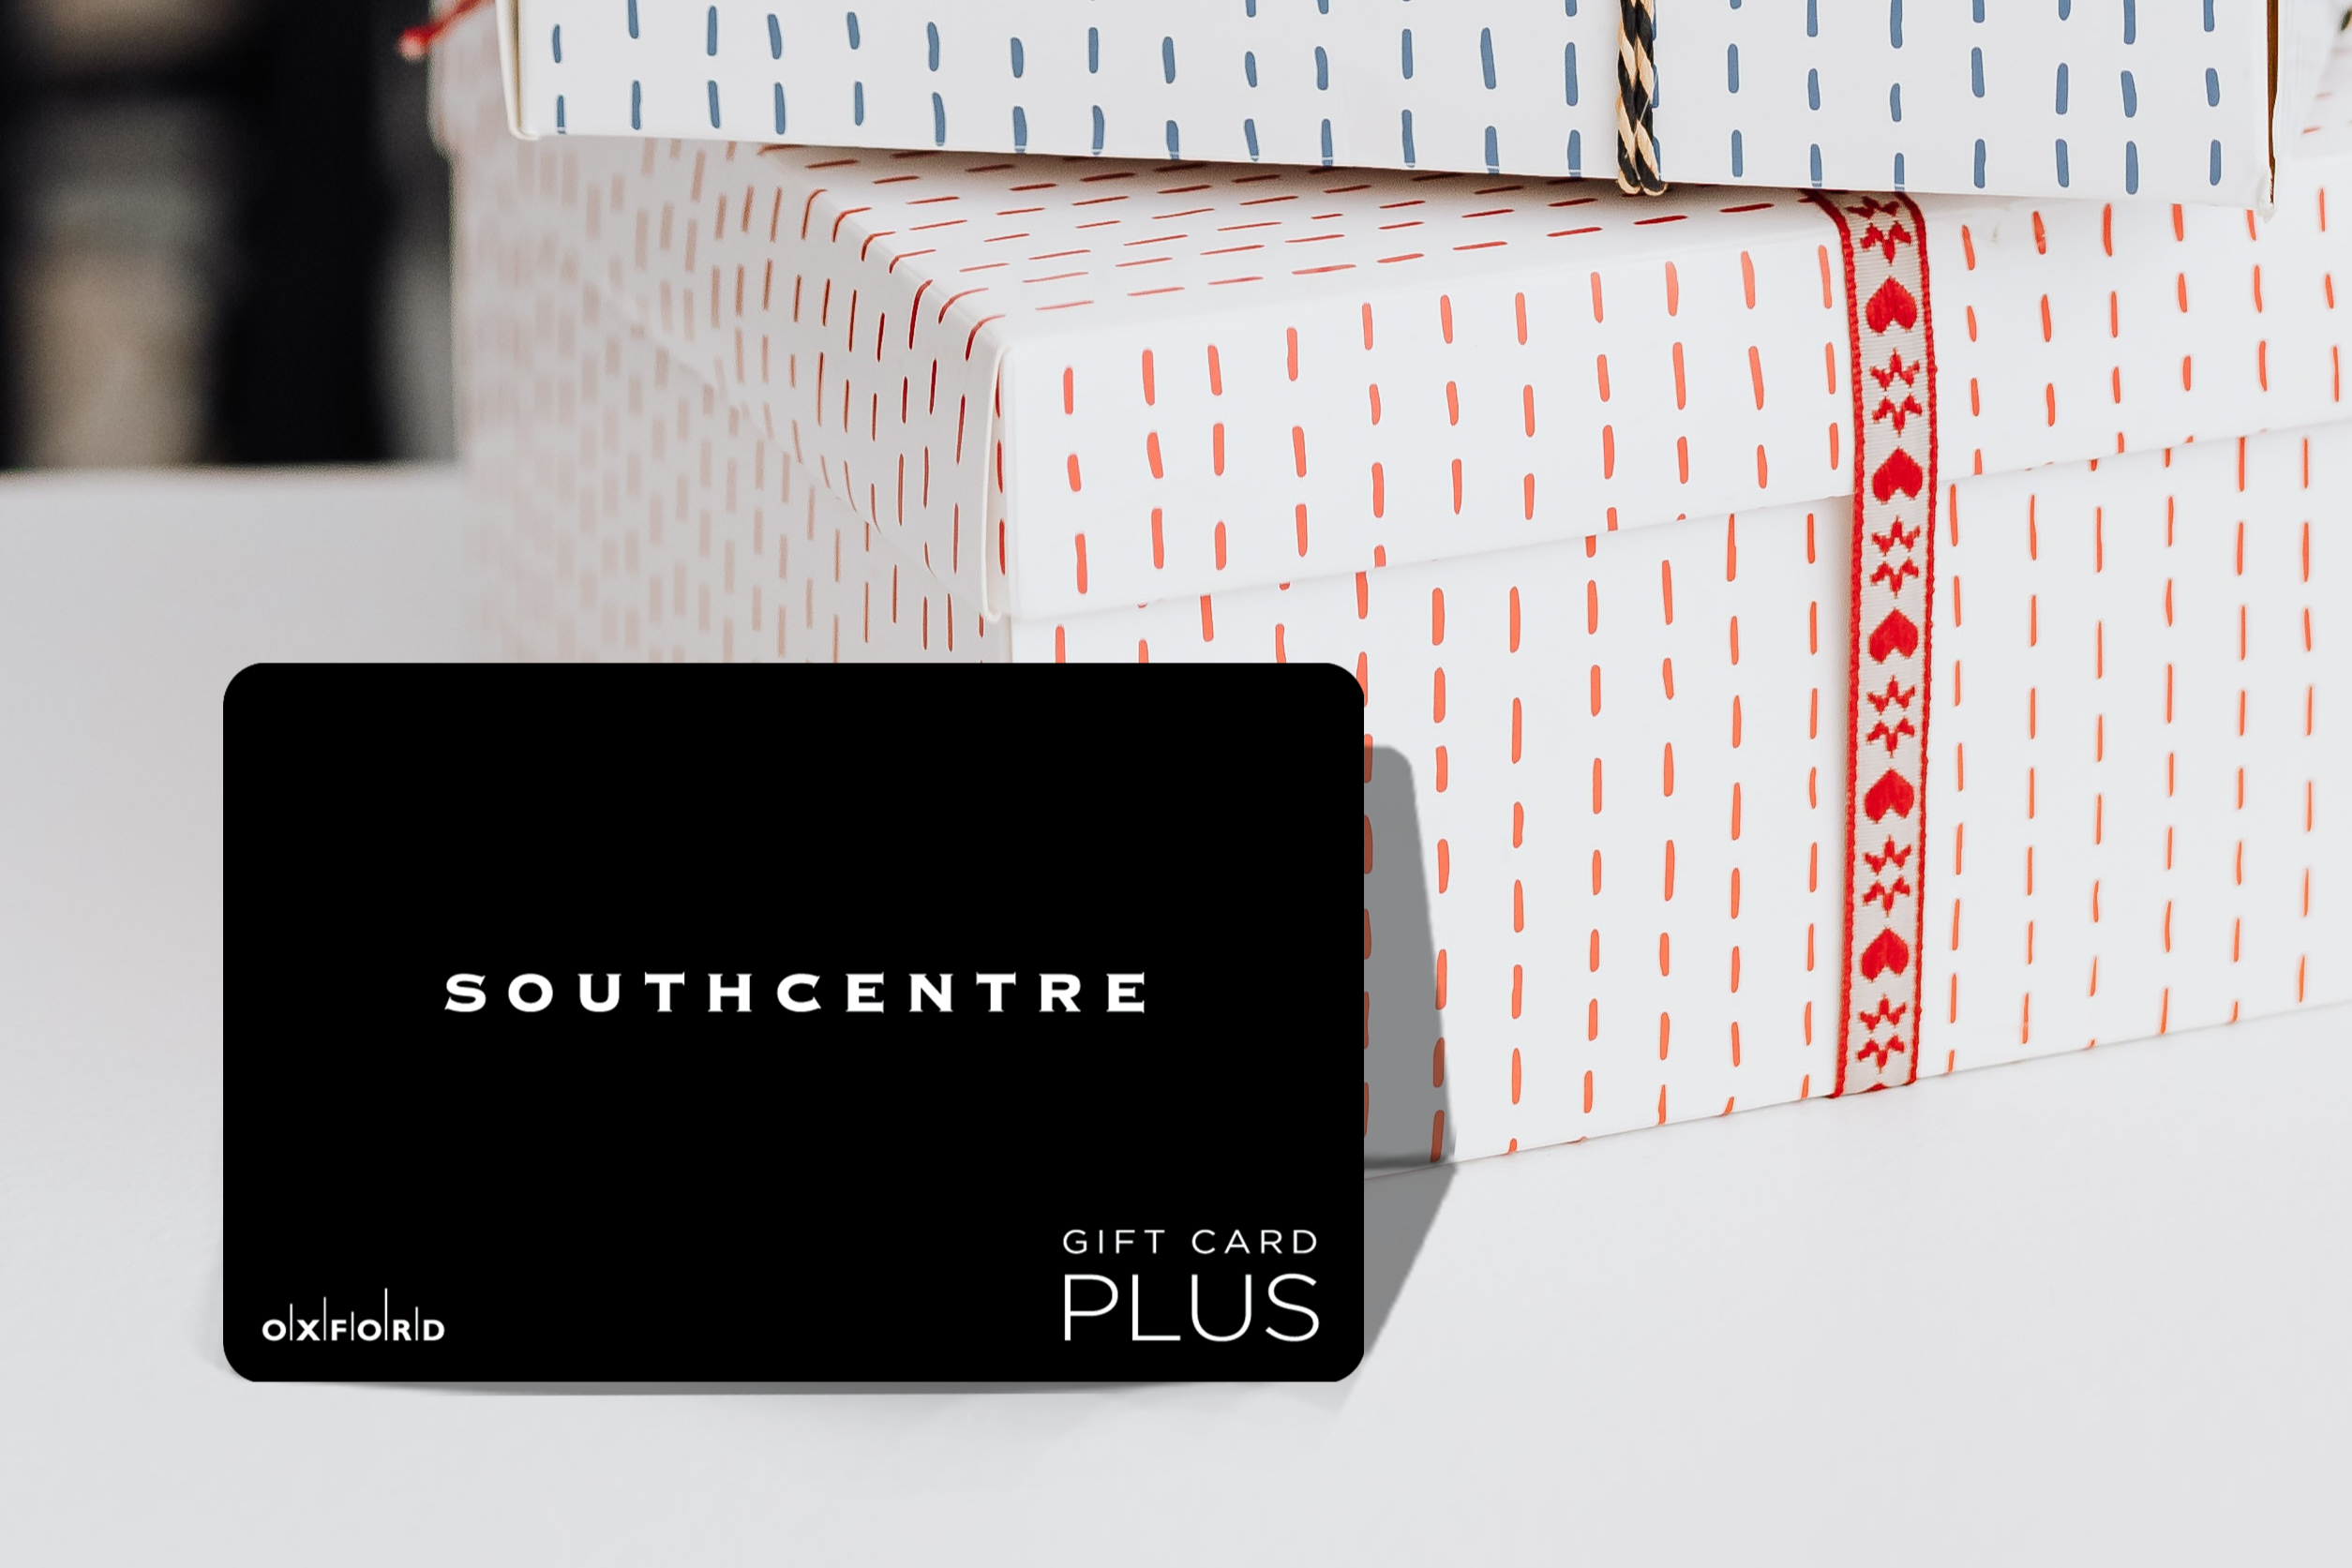 promotional image of a black southcentre gift card in front of gift boxes